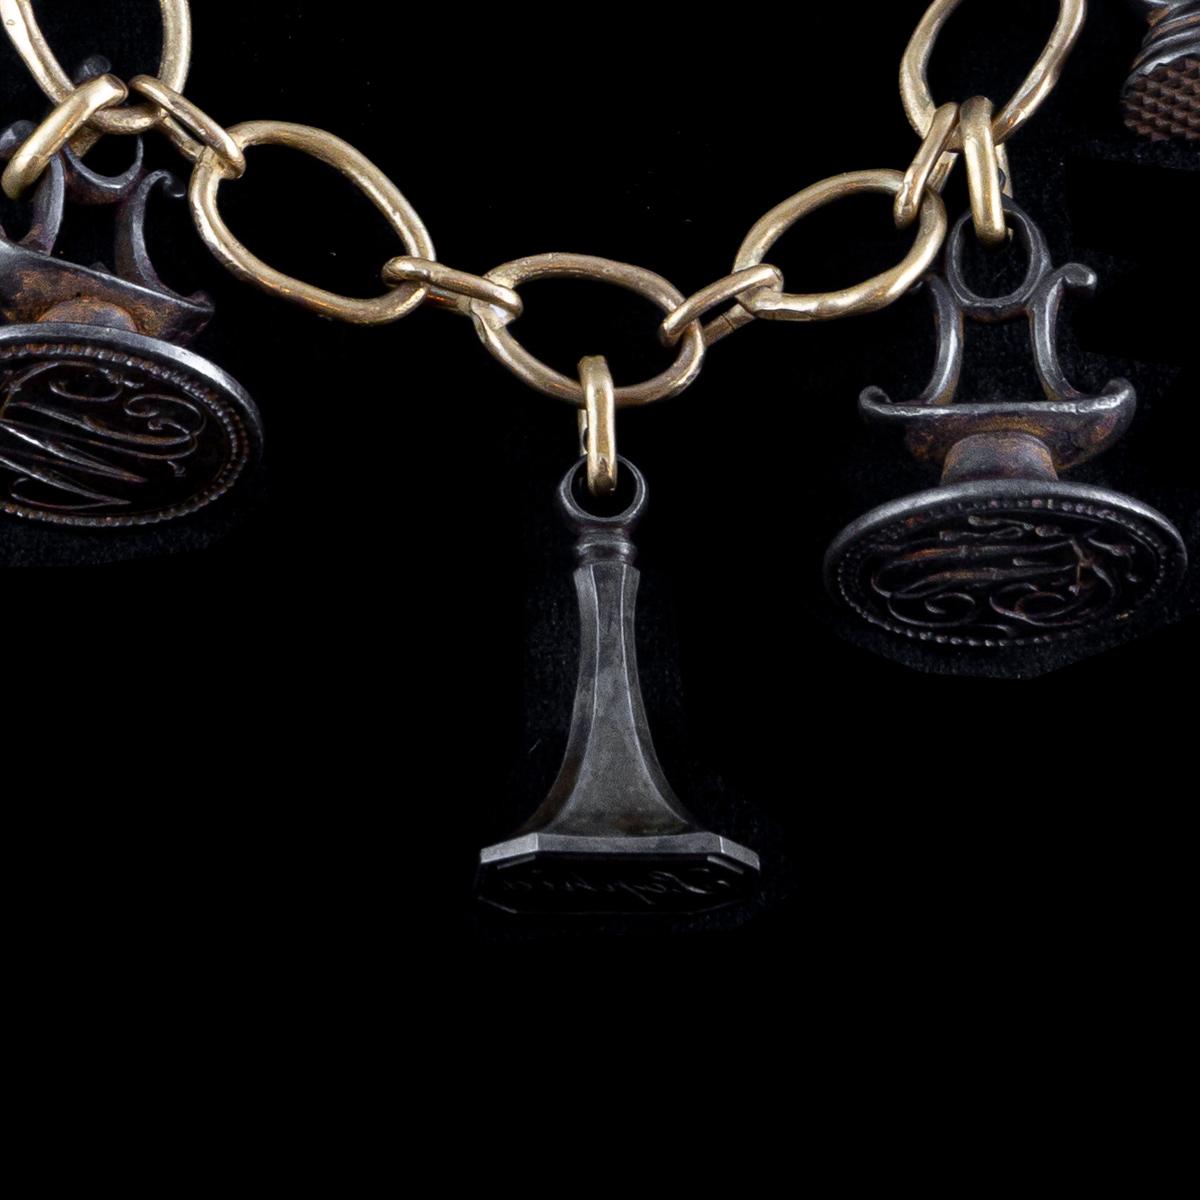 Handmade bronze chain necklace with antique steel seals from around 1880. A splendid collection of seals, in the Middle Ages the seal in addition to guaranteeing the confidentiality of the message, becomes testimony of the authenticity of the